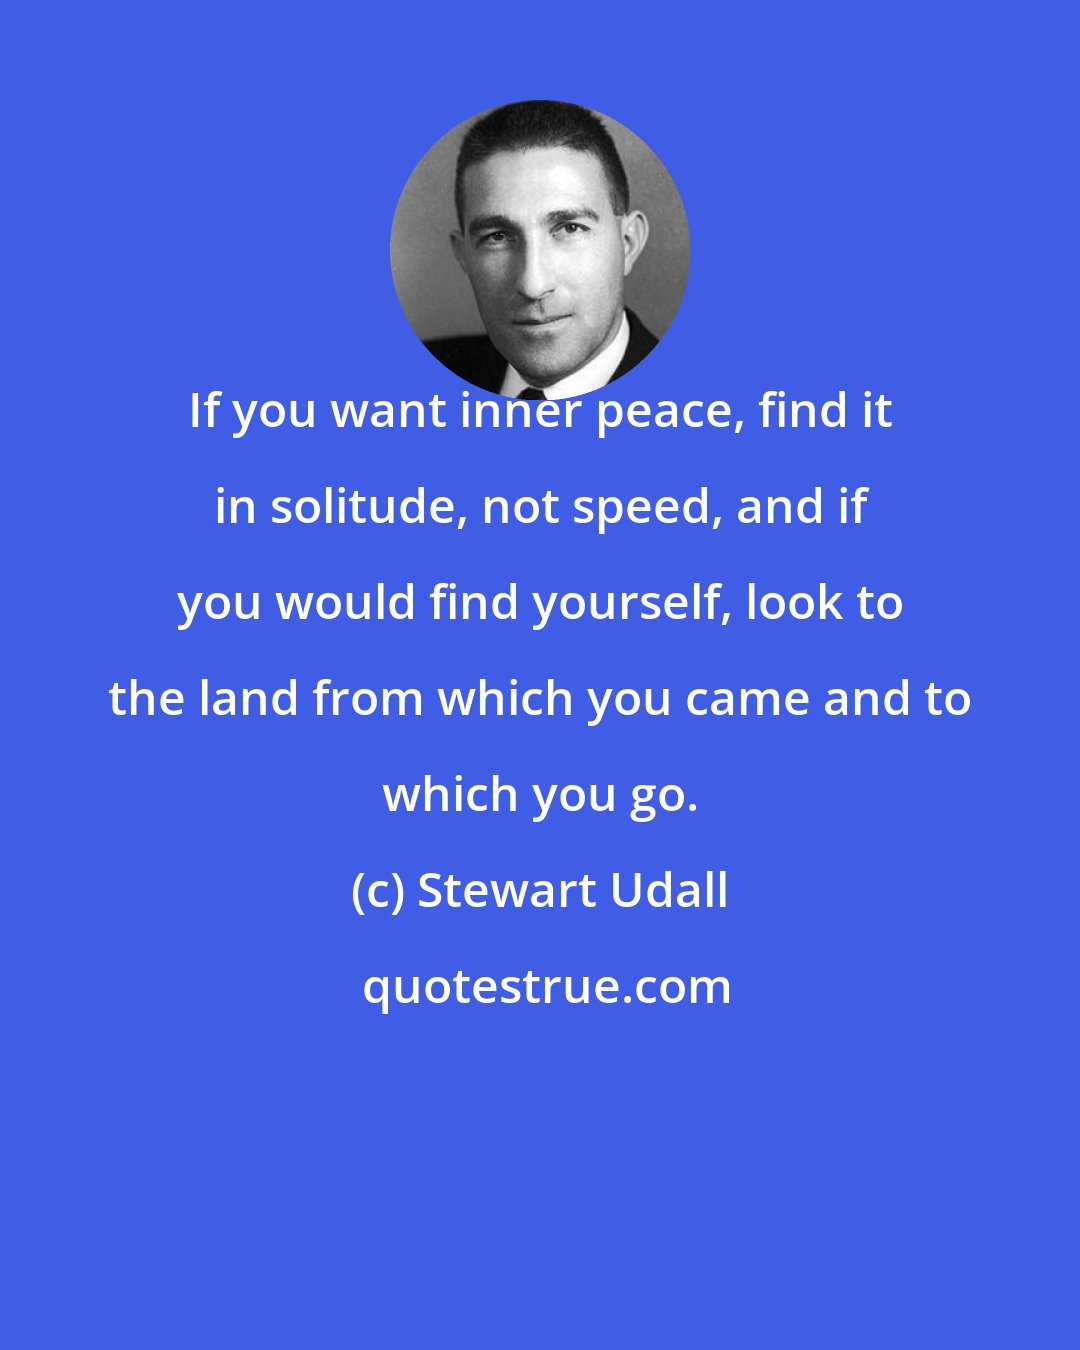 Stewart Udall: If you want inner peace, find it in solitude, not speed, and if you would find yourself, look to the land from which you came and to which you go.